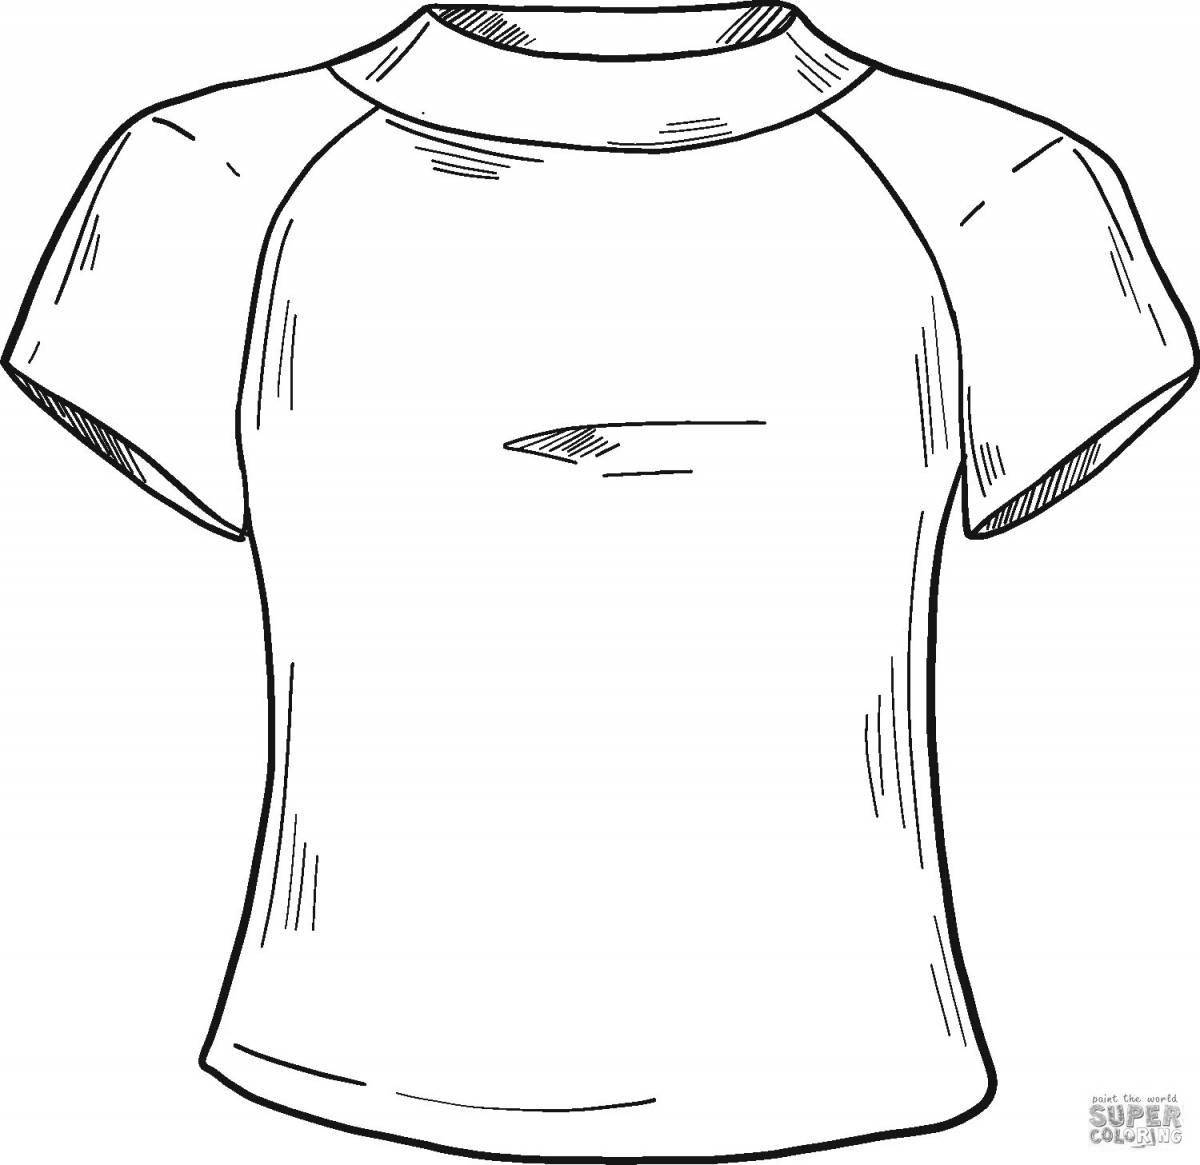 Colored T-shirt for preschoolers